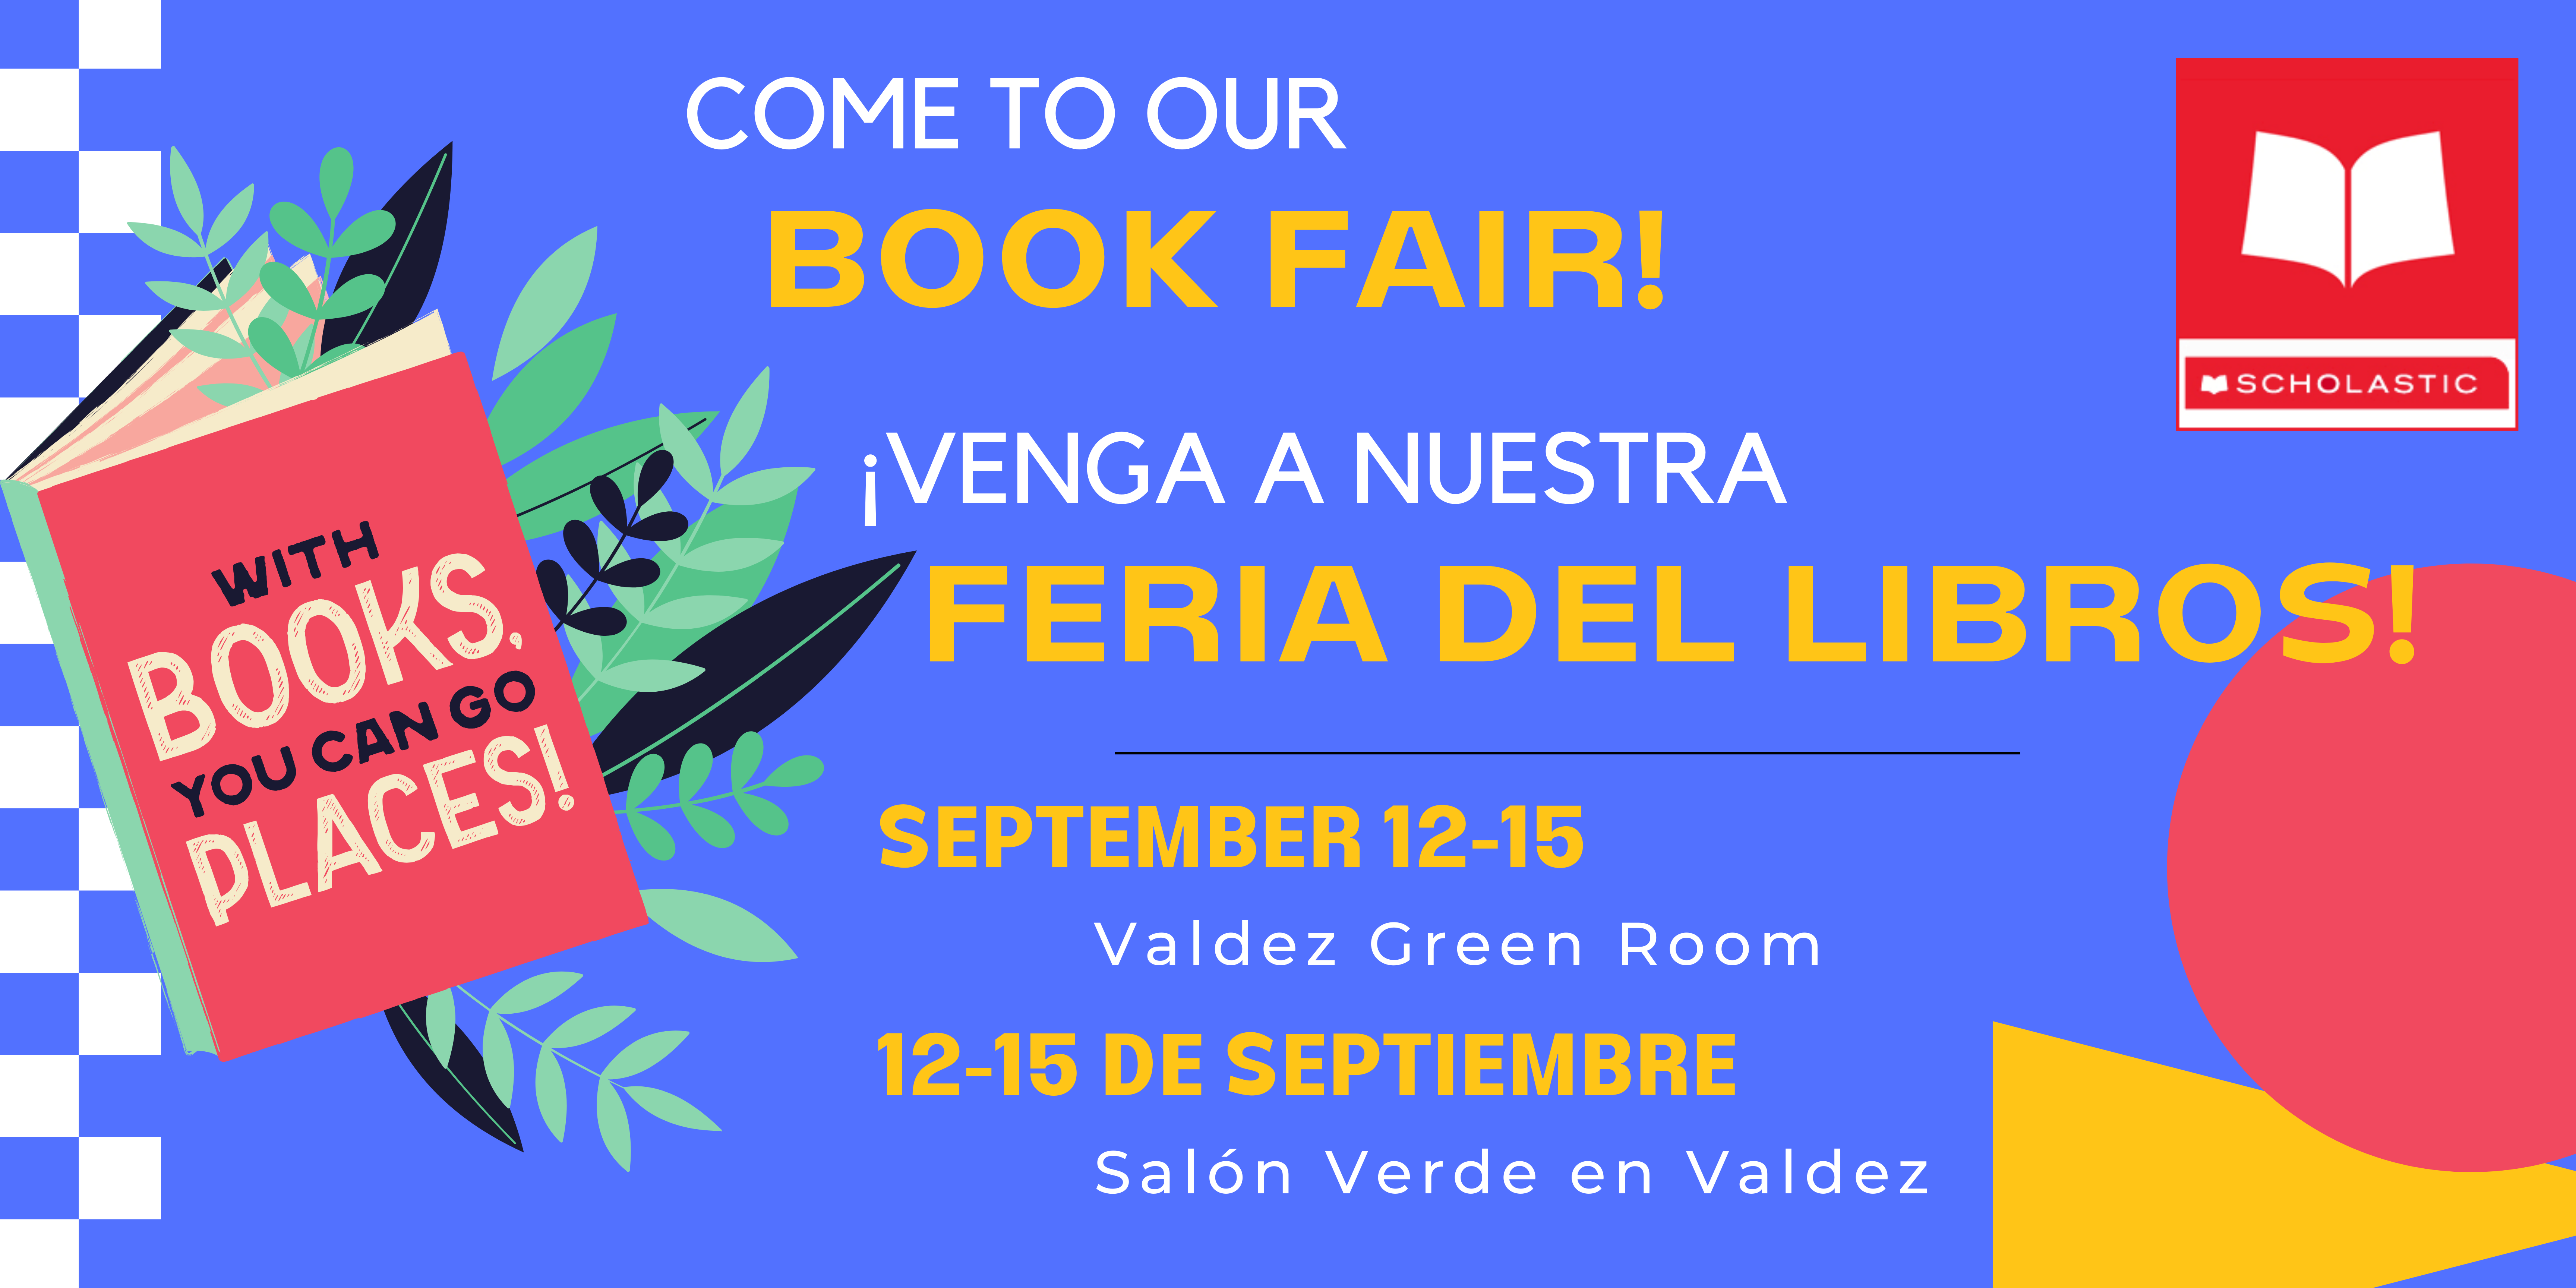 Yellow and white text on blue background says, "Come to Our Book Fair! September 12-15, Valdez Green Room" and "¡Venga a nuestra feria del libro! 12-15 de septiembre. Salon verde en Valdez."